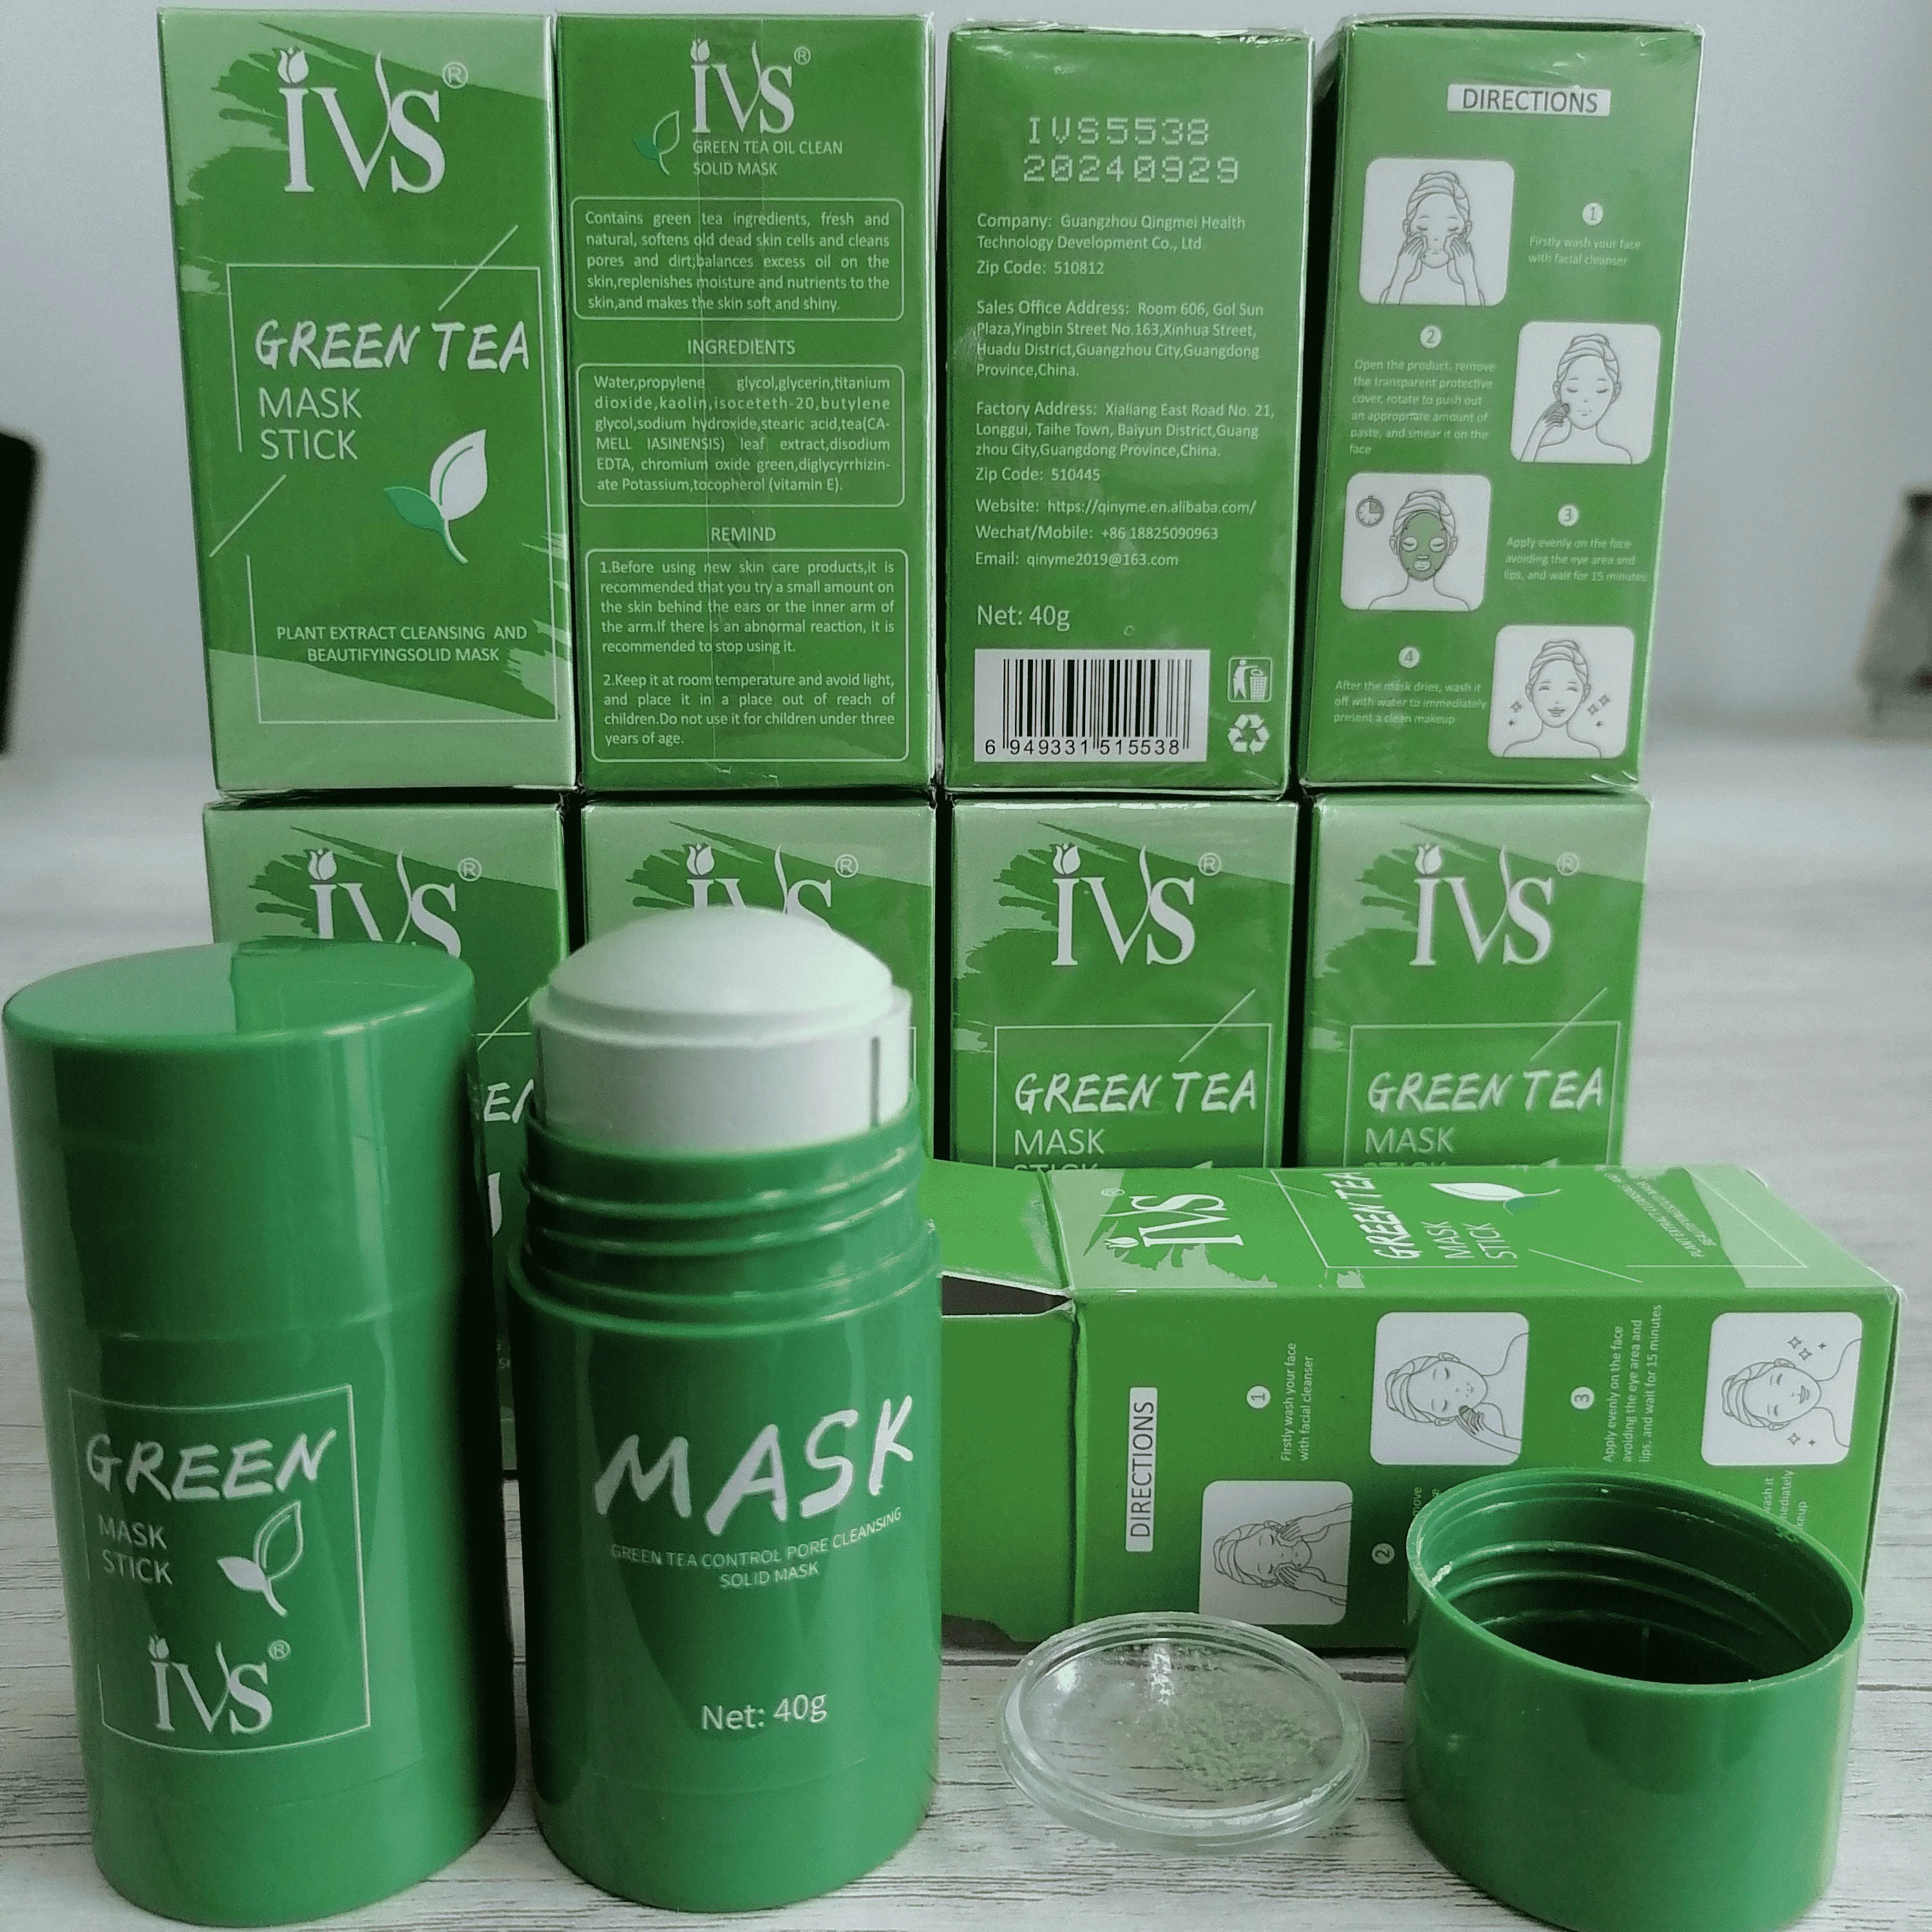 

IVS Brightening Face Green Tea Clay Mask Wholesale Facial Private Label Organic Vegan Green Mask Stick For Face Care